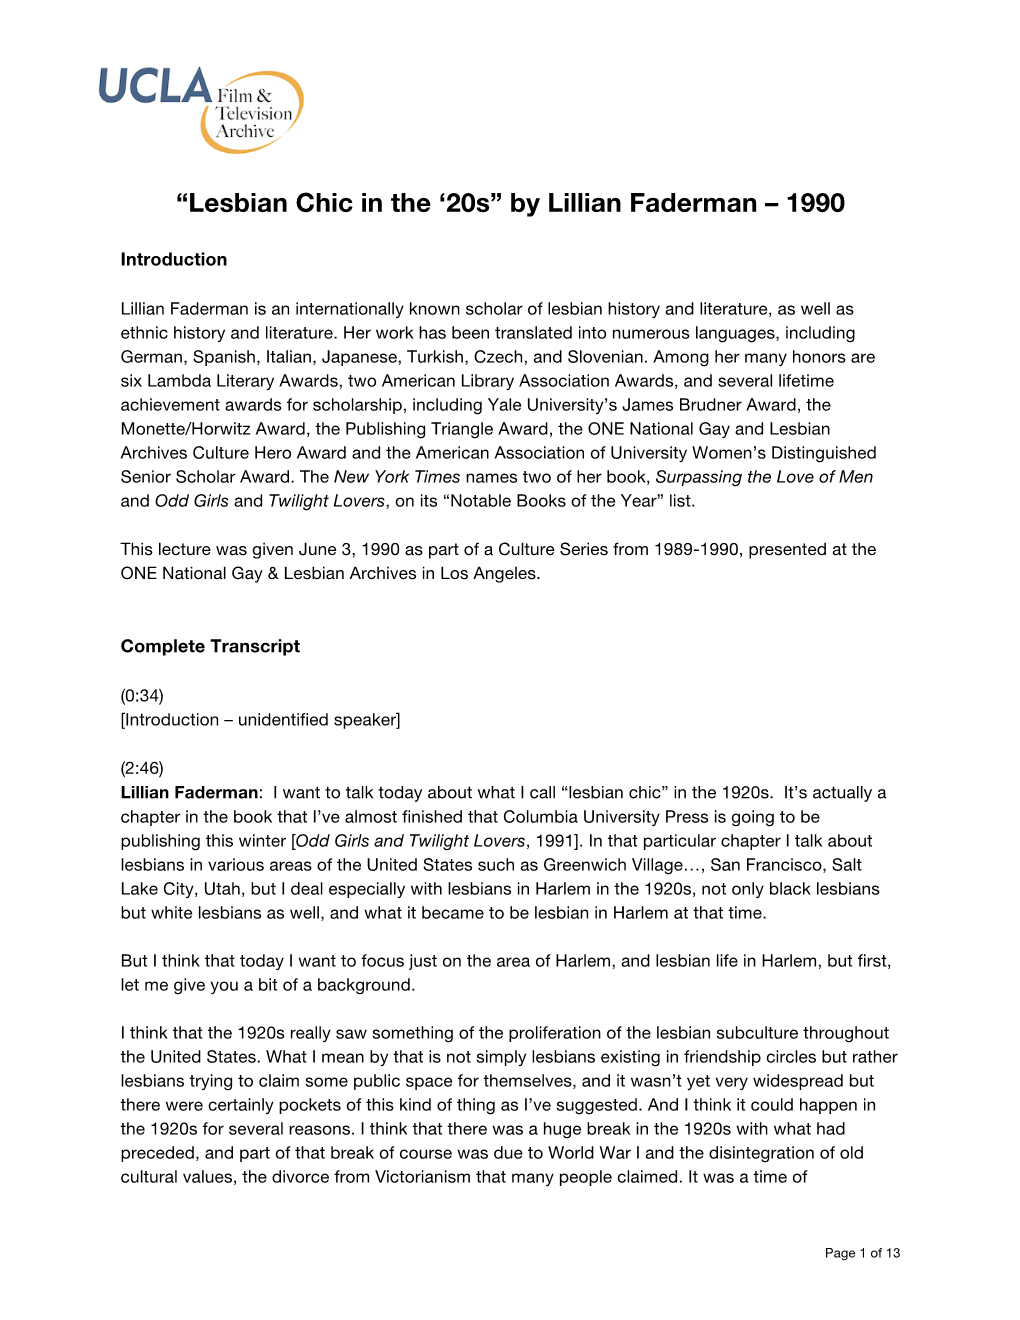 “Lesbian Chic in the '20S” by Lillian Faderman – 1990